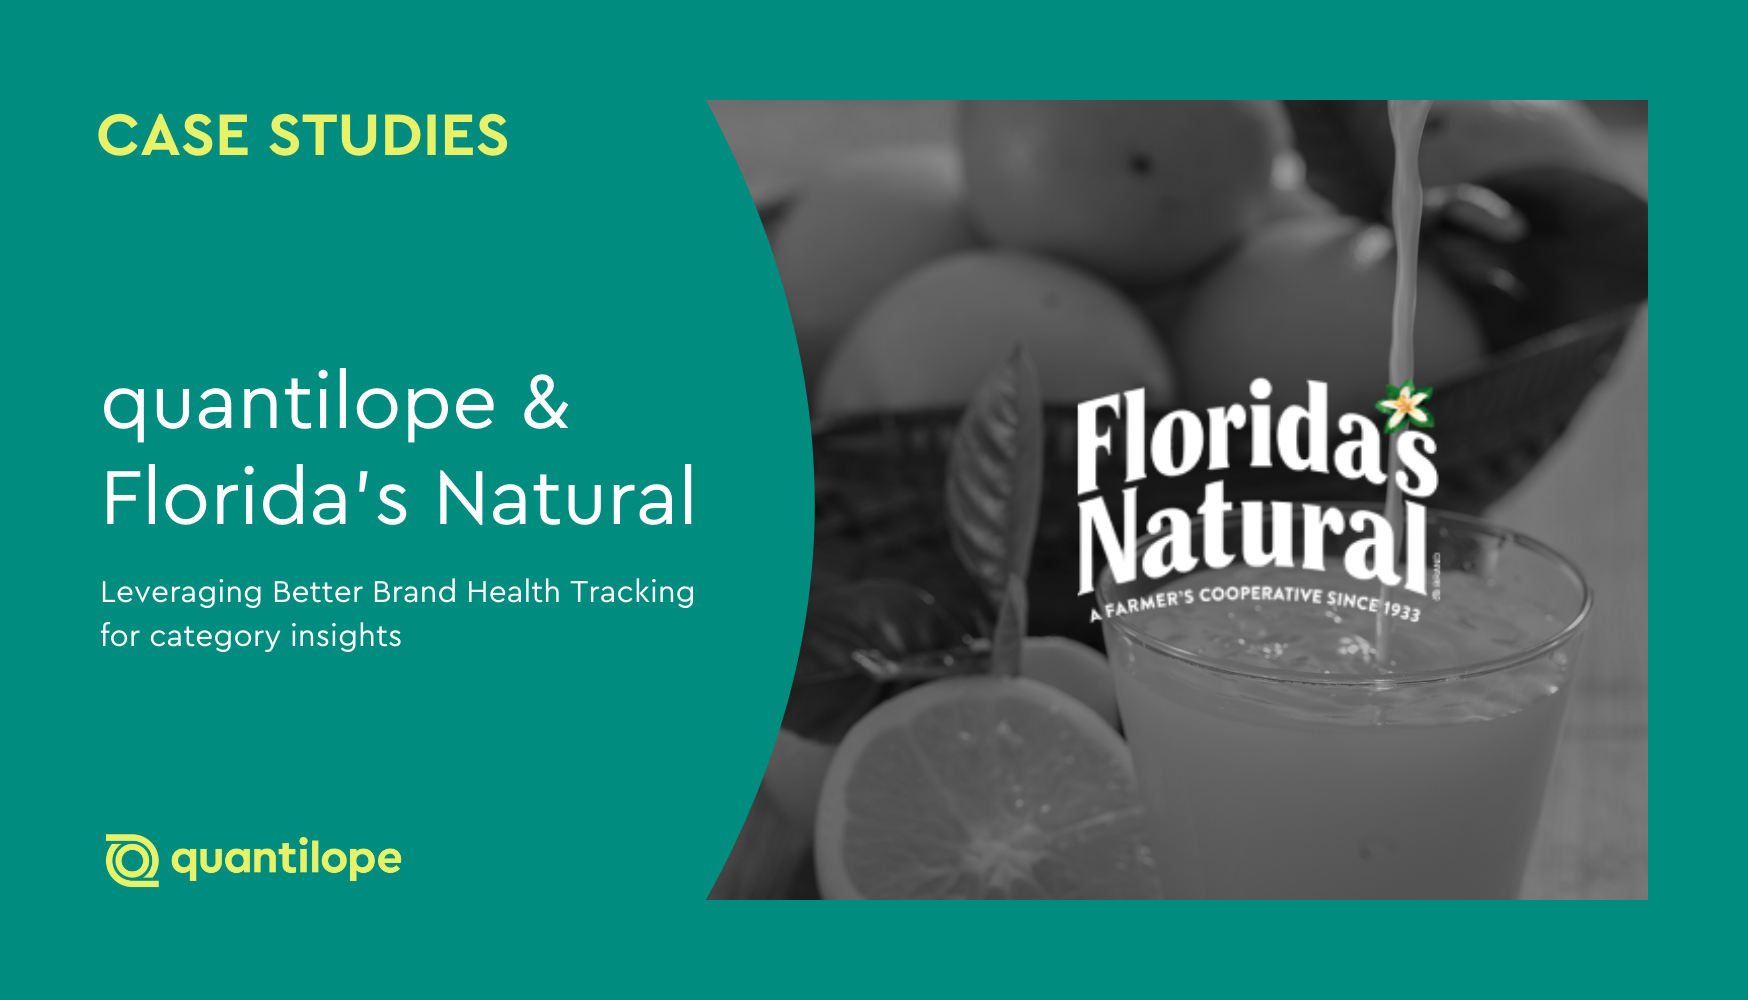 green background with black and white image of oranges and orange juice with floridas natural logo